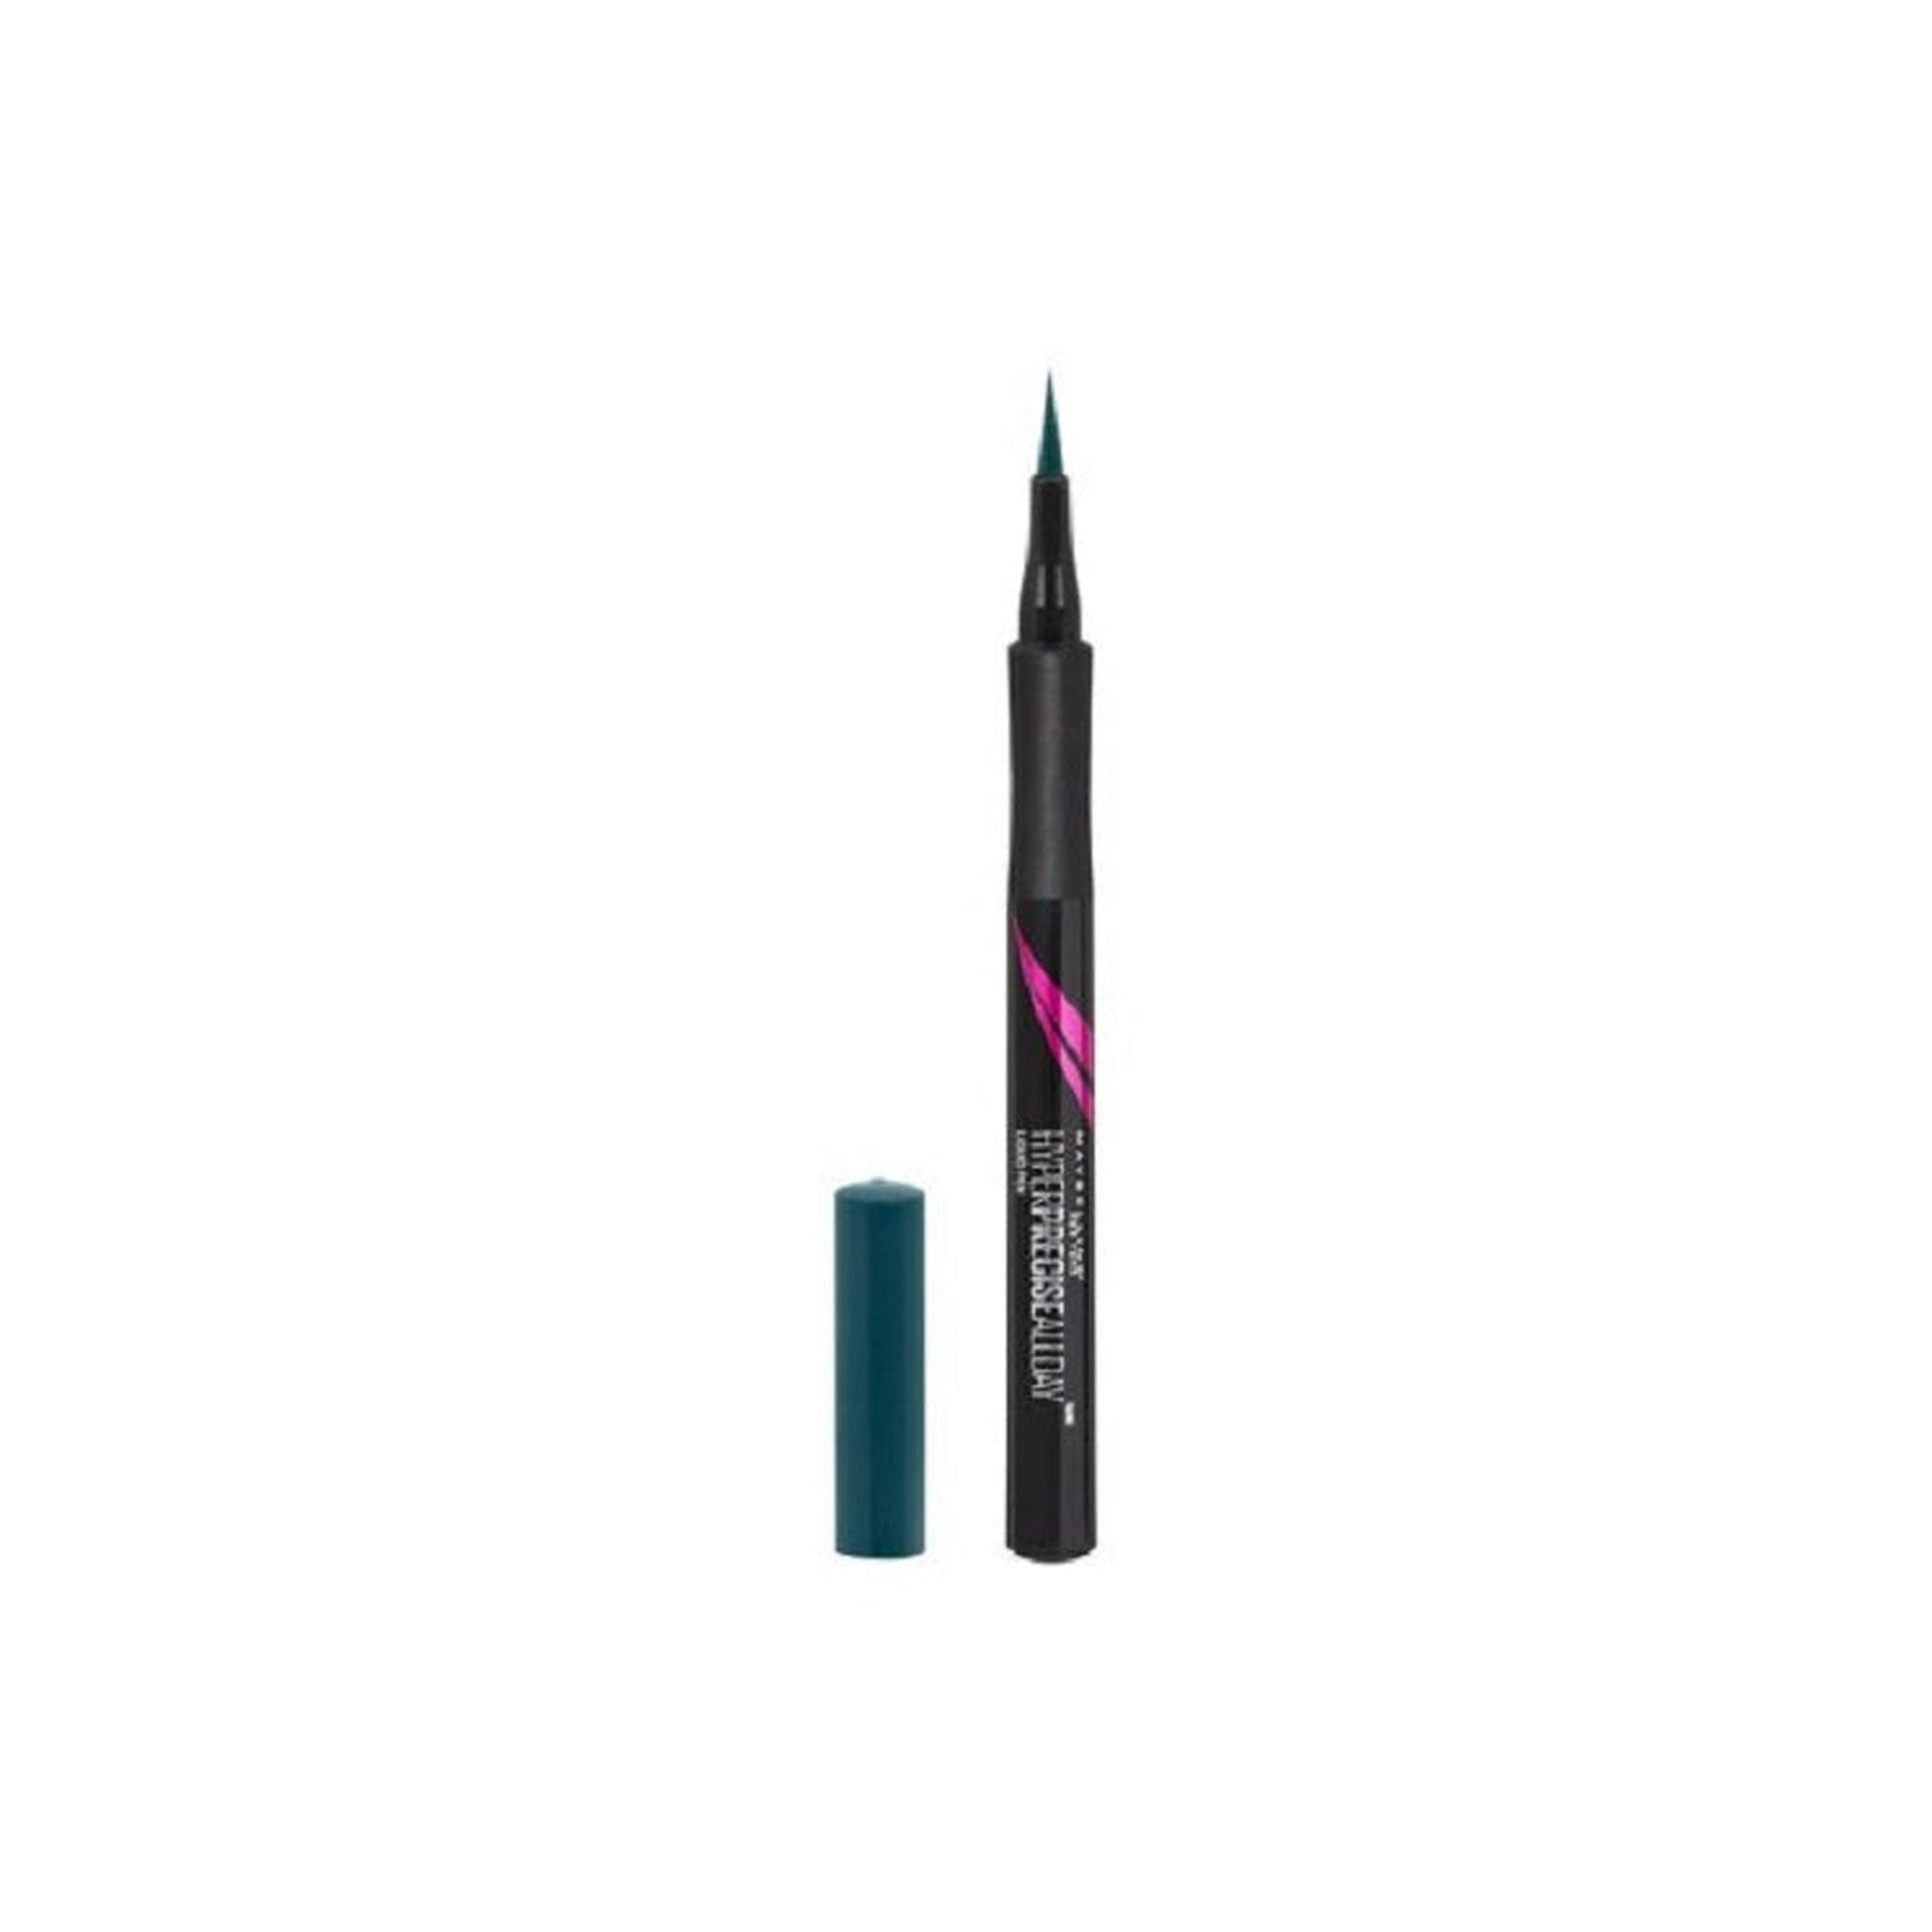 Maybelline Hyper Precise All Day Liquid Eyeliner - Jungle Green-Maybelline-BeautyNmakeup.co.uk